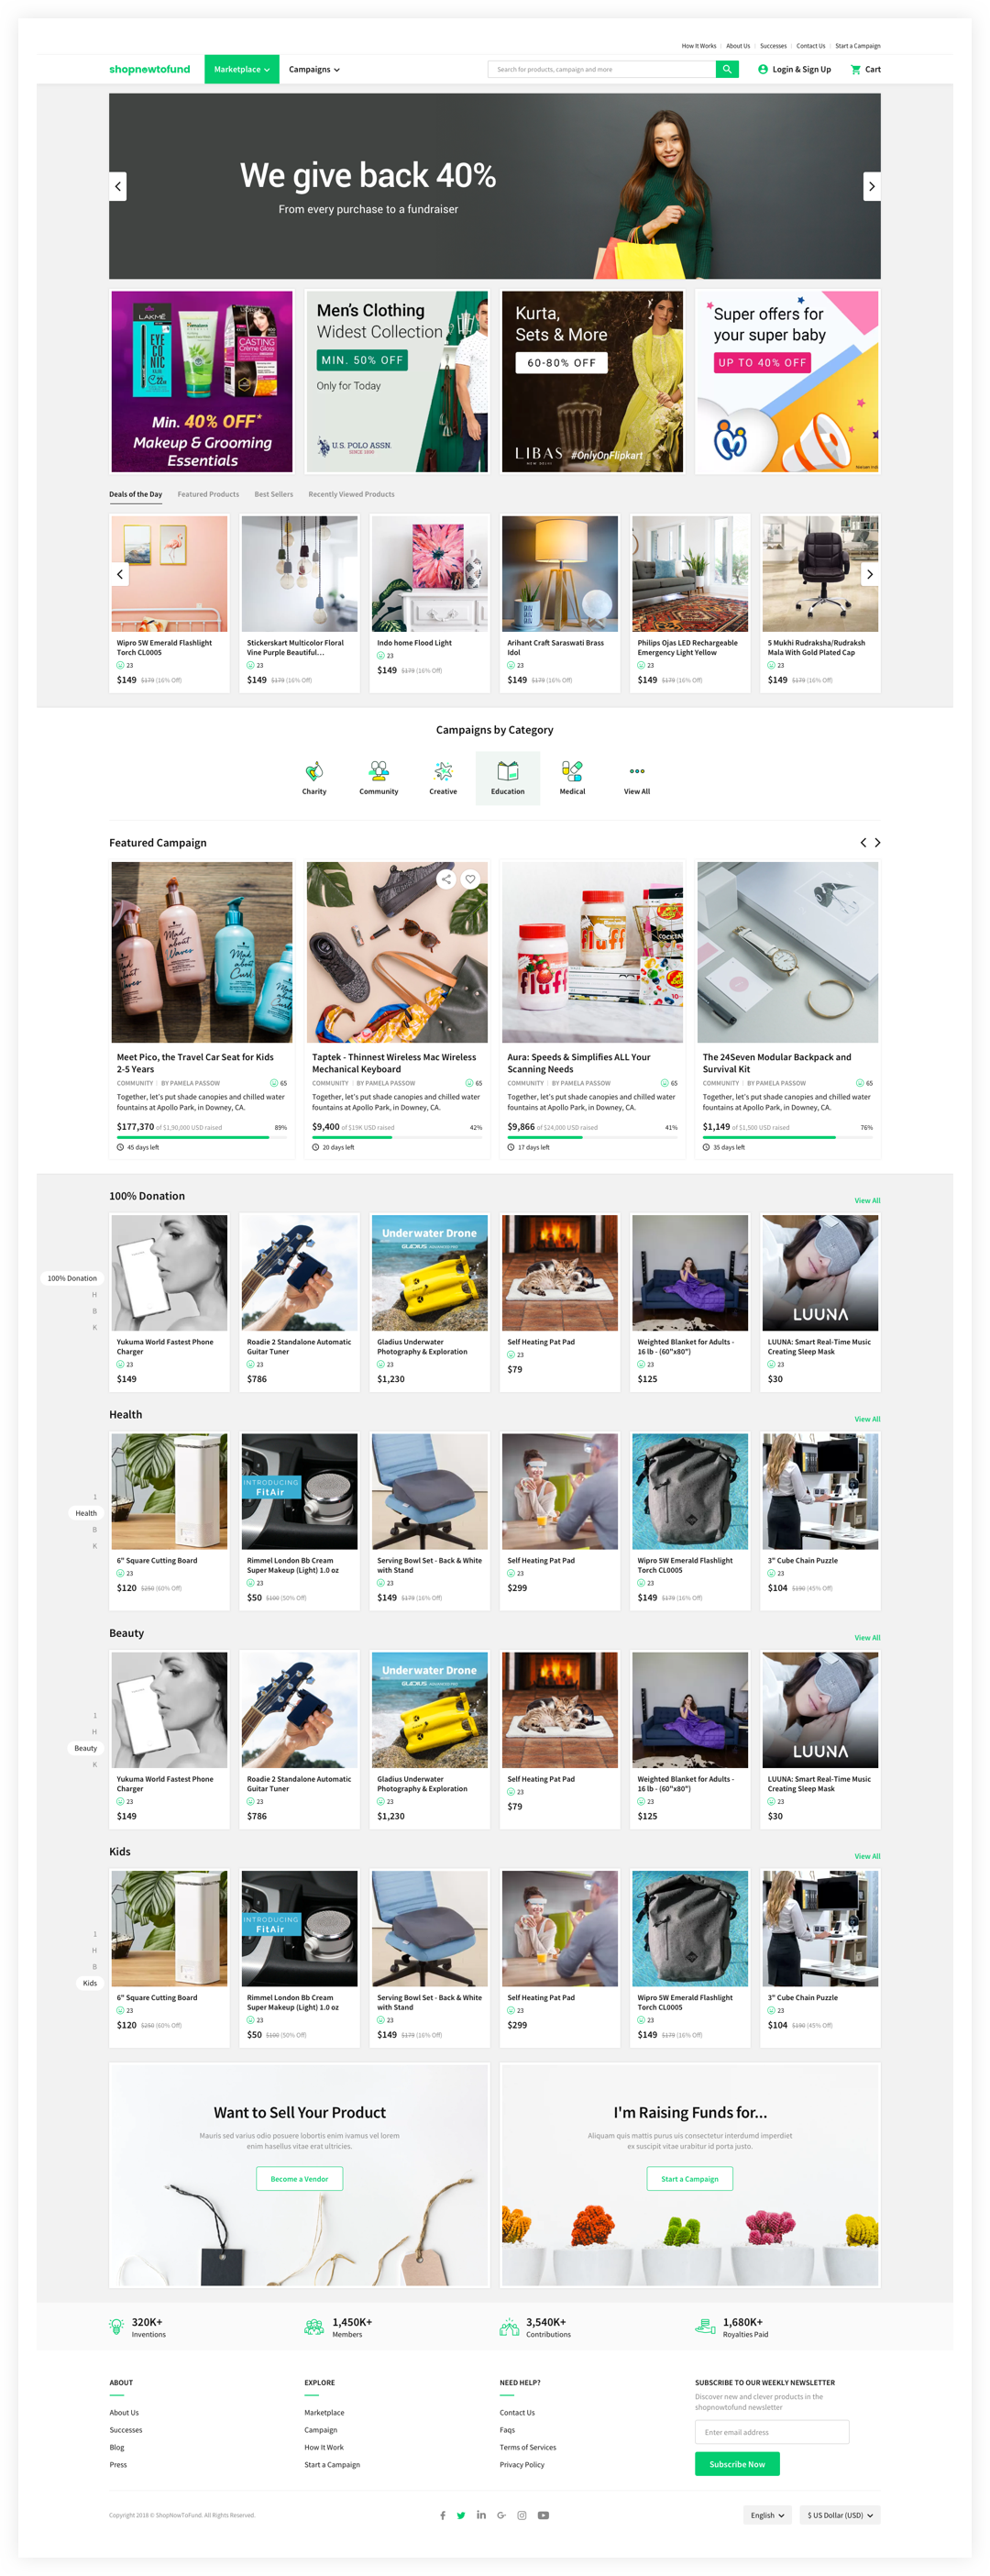 homepage of an ecommerece marketplace